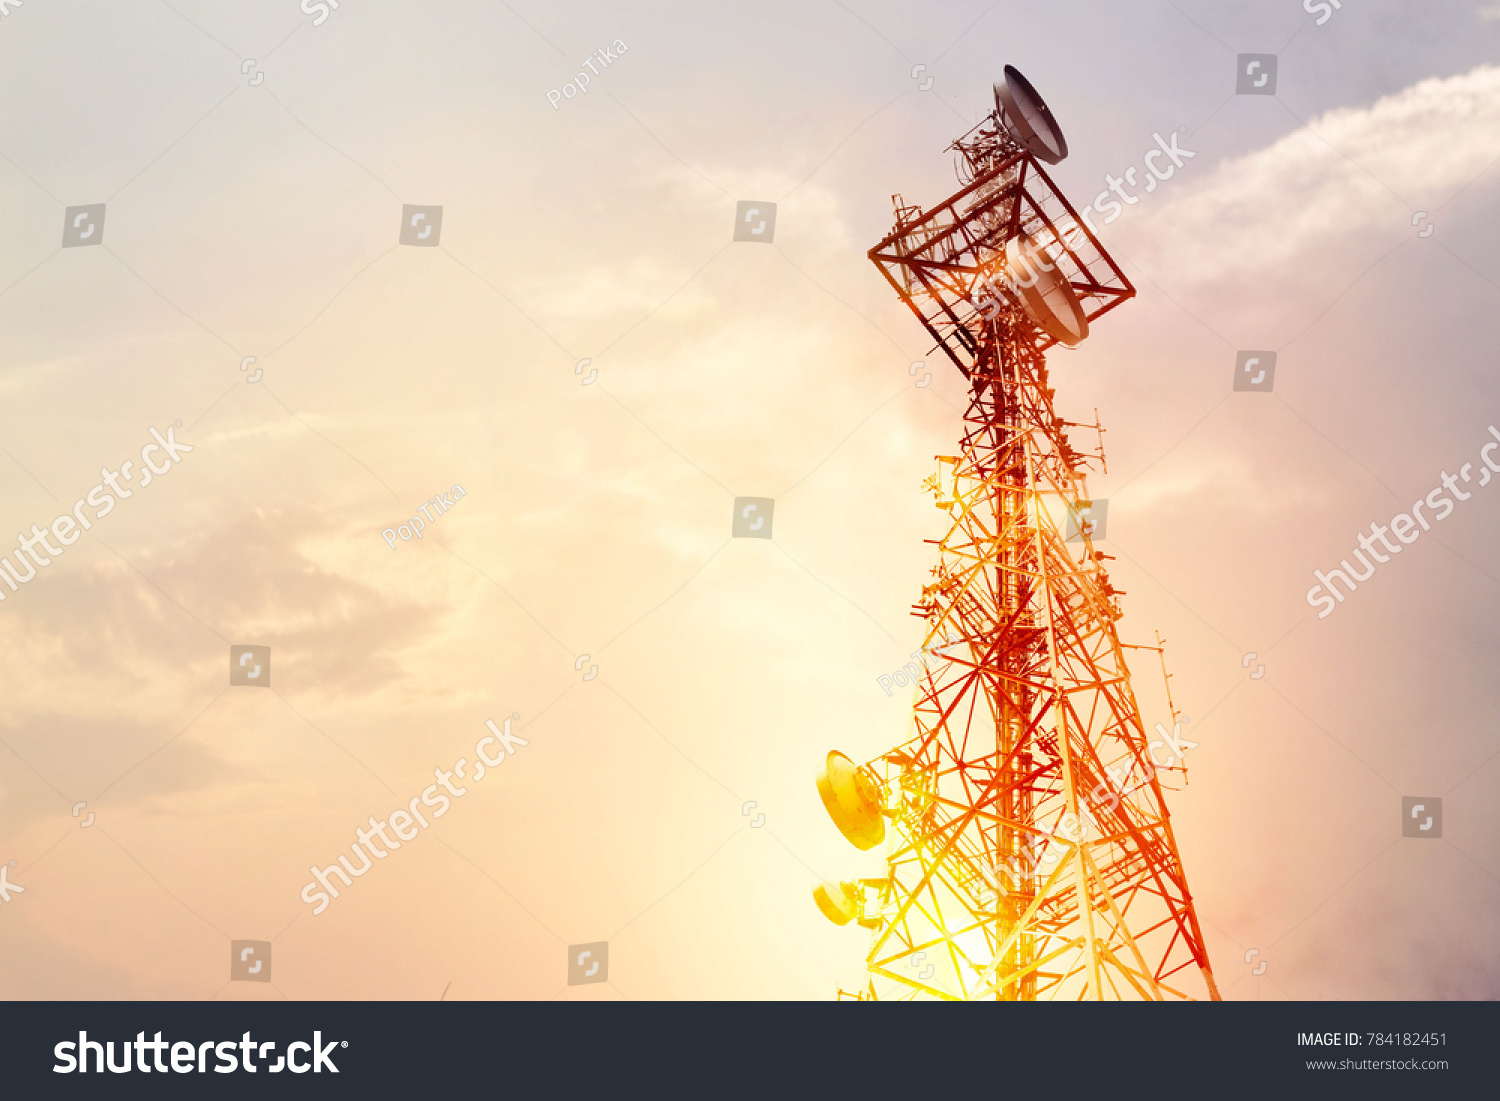 Abstract telecommunication tower Antenna and satellite dish at sunset sky background #784182451